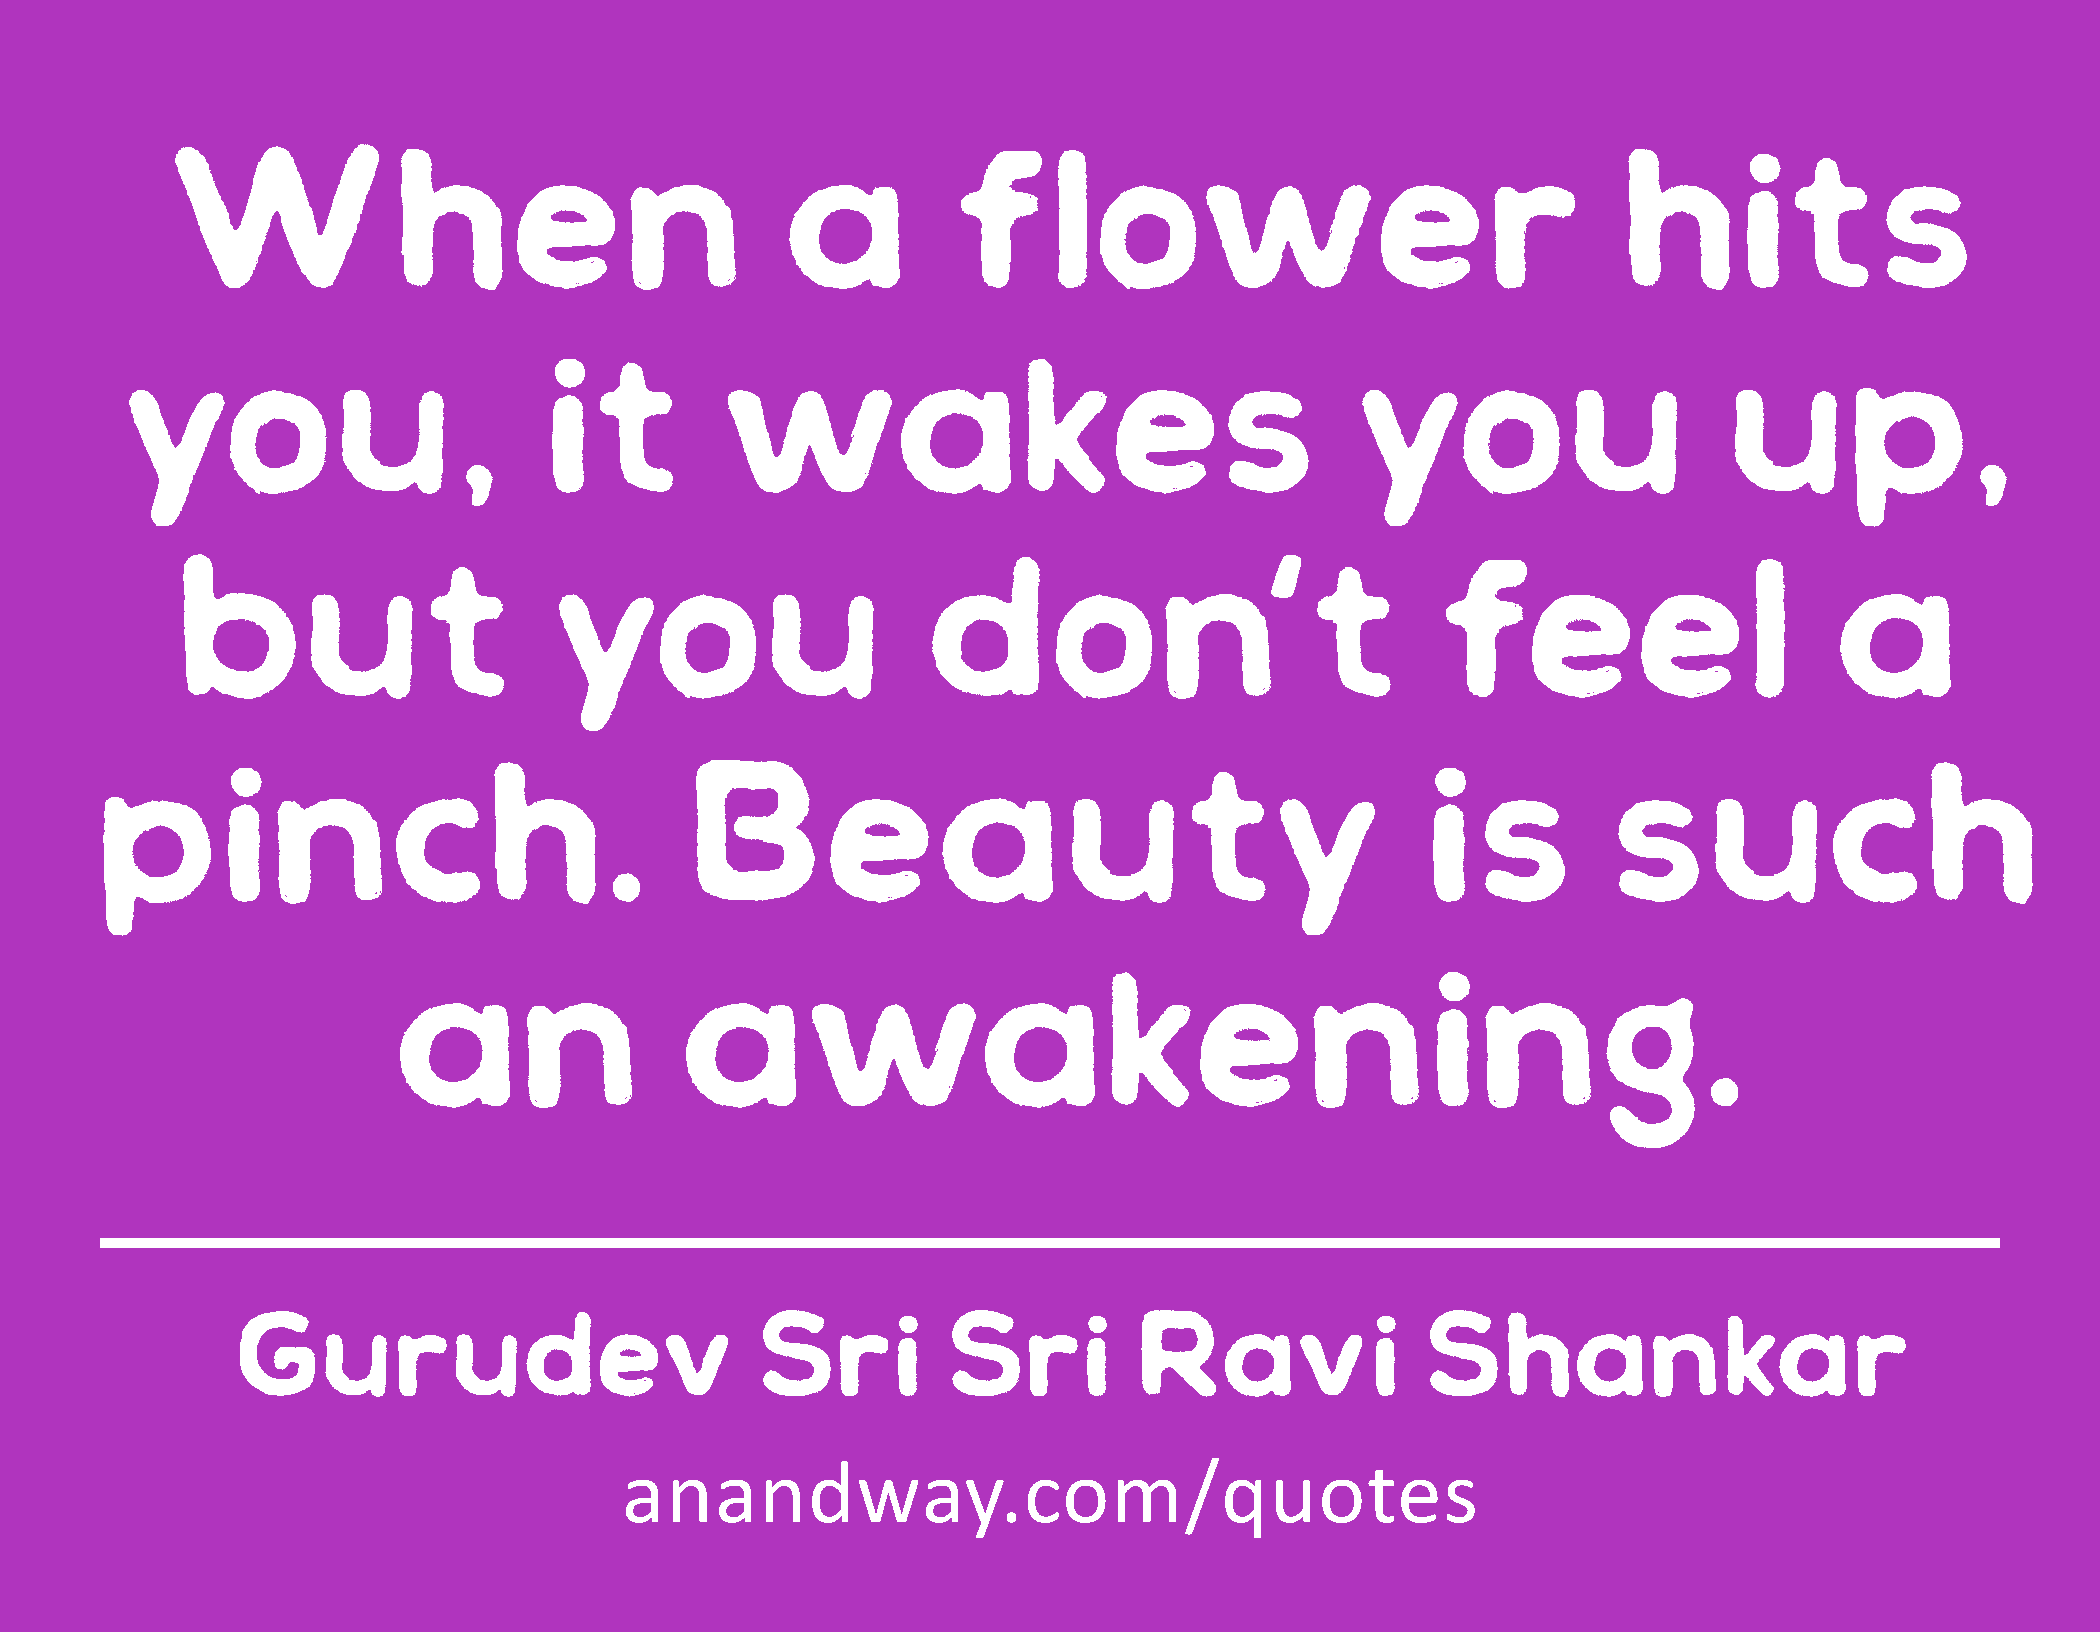 When a flower hits you, it wakes you up, but you don't feel a pinch. Beauty is such an awakening. 
 -Gurudev Sri Sri Ravi Shankar